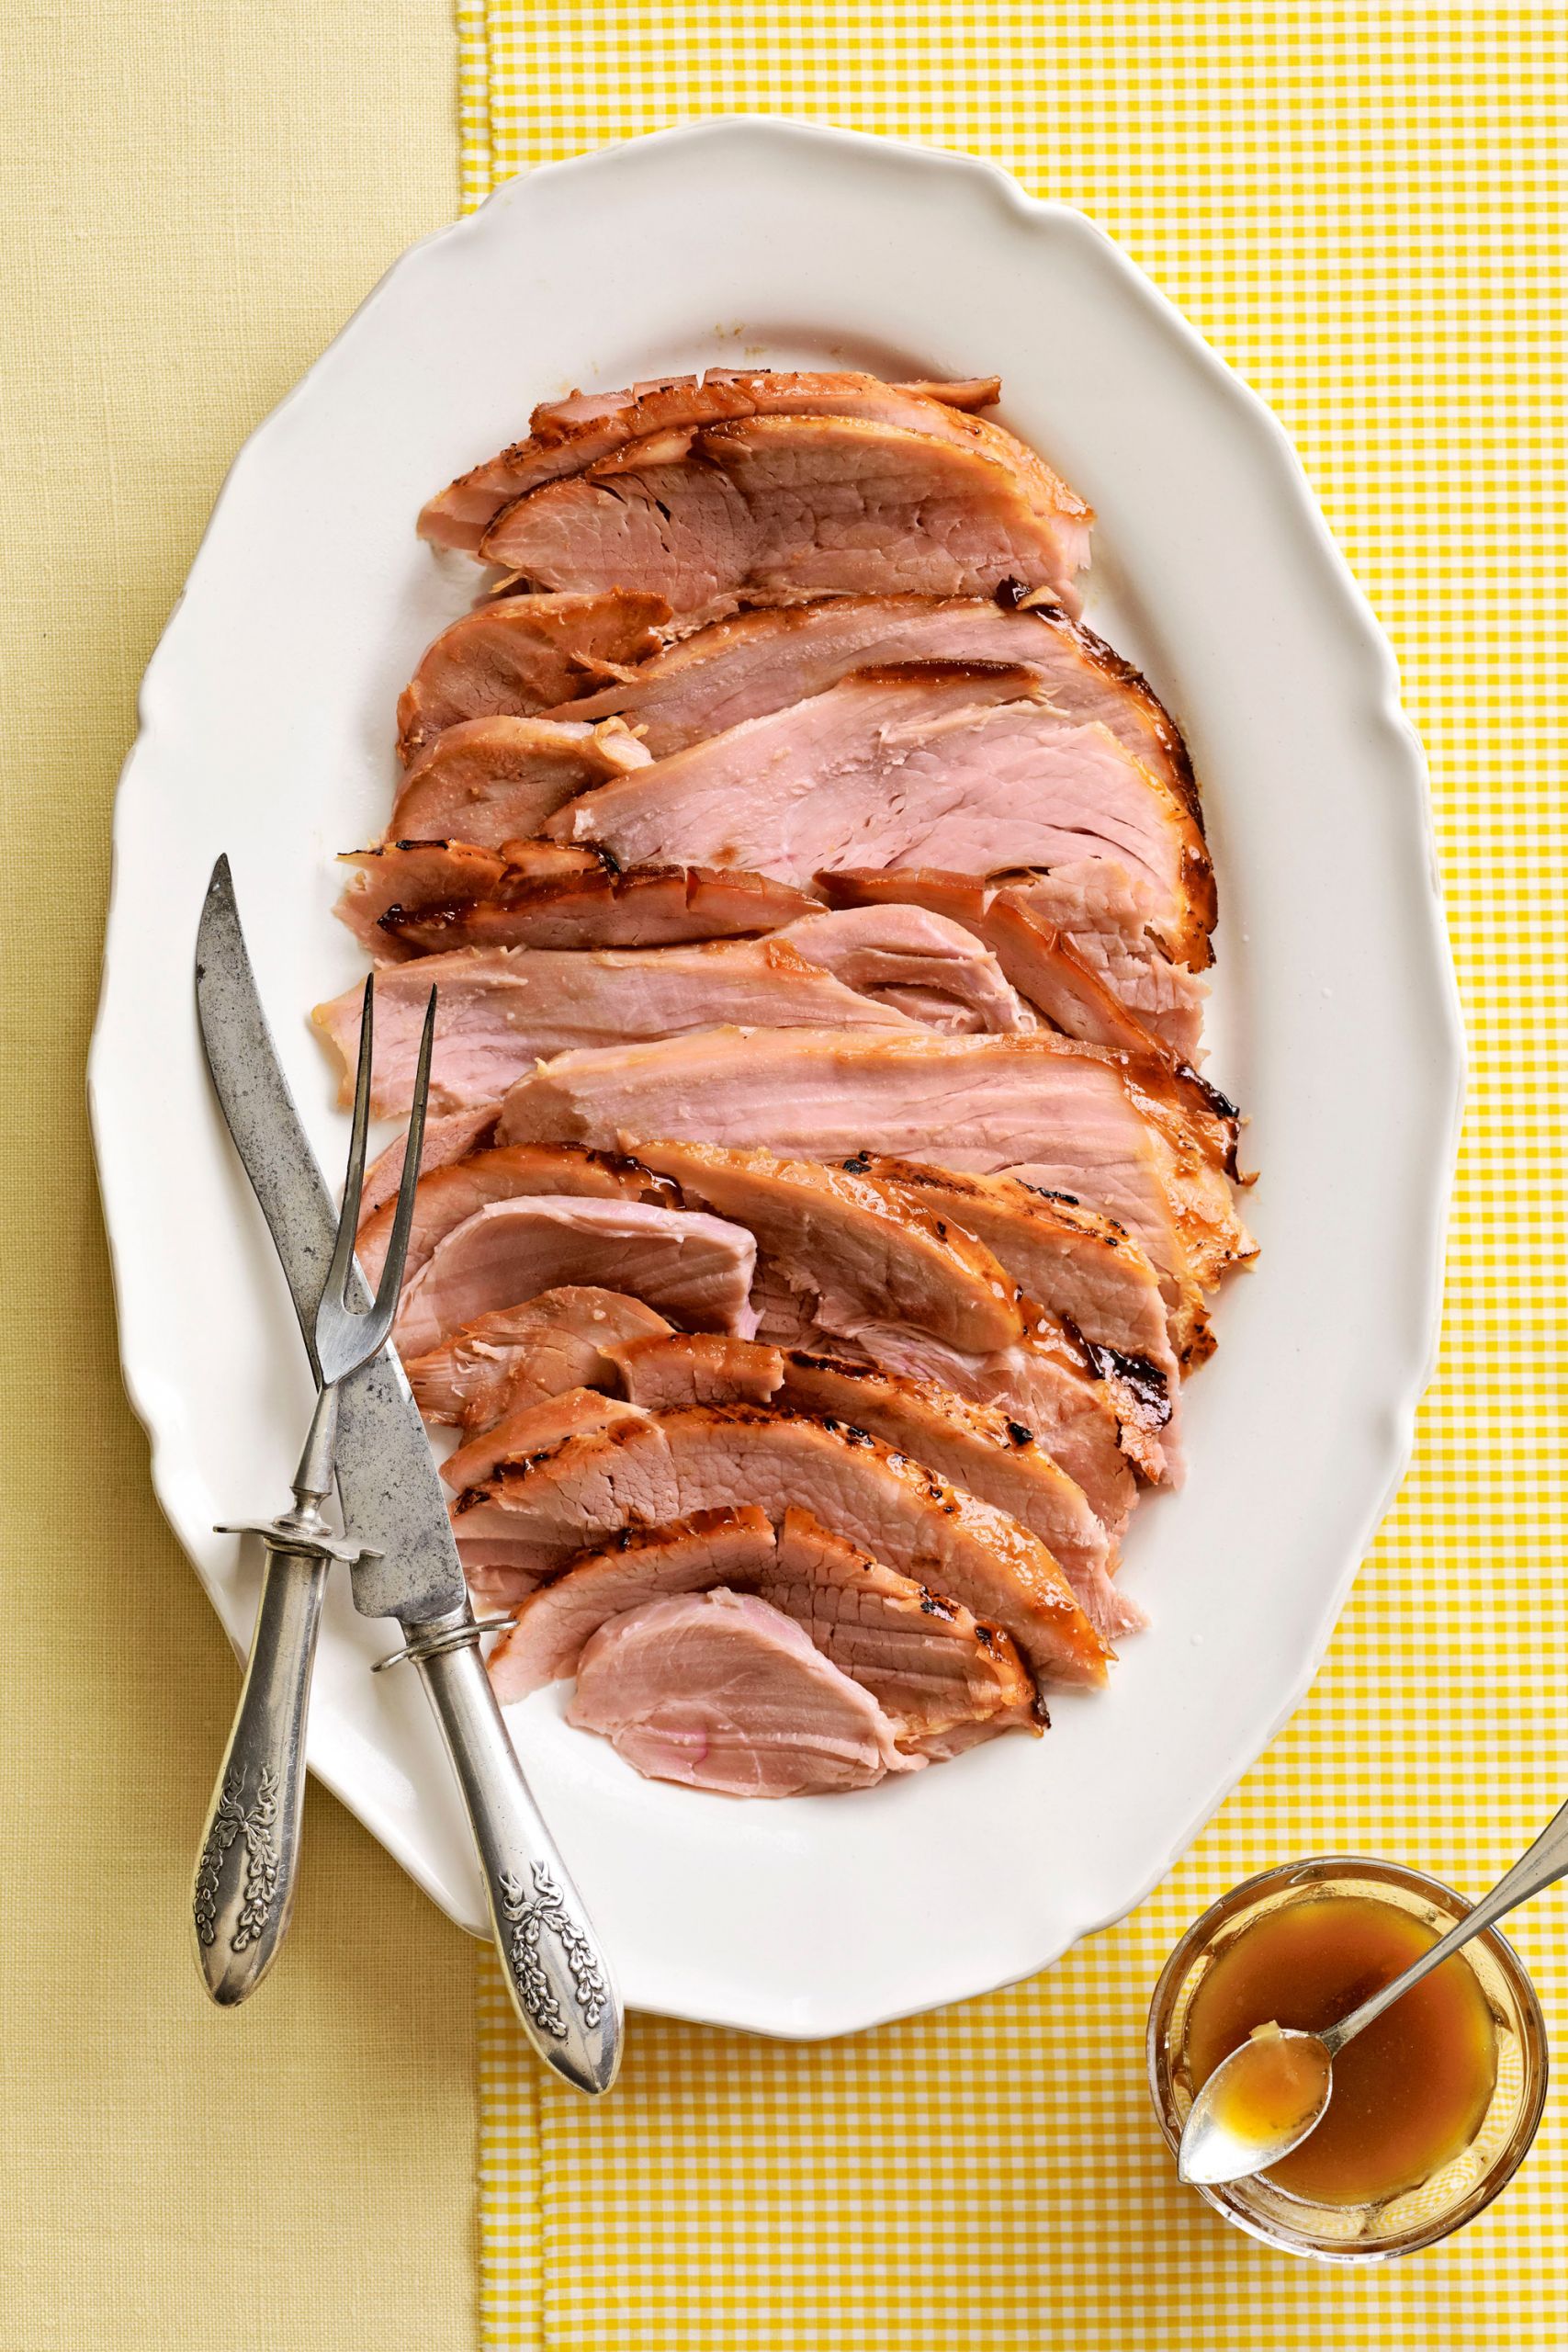 Best Easter Ham Luxury 11 Best Easter Ham Recipes How to Make An Easter Ham